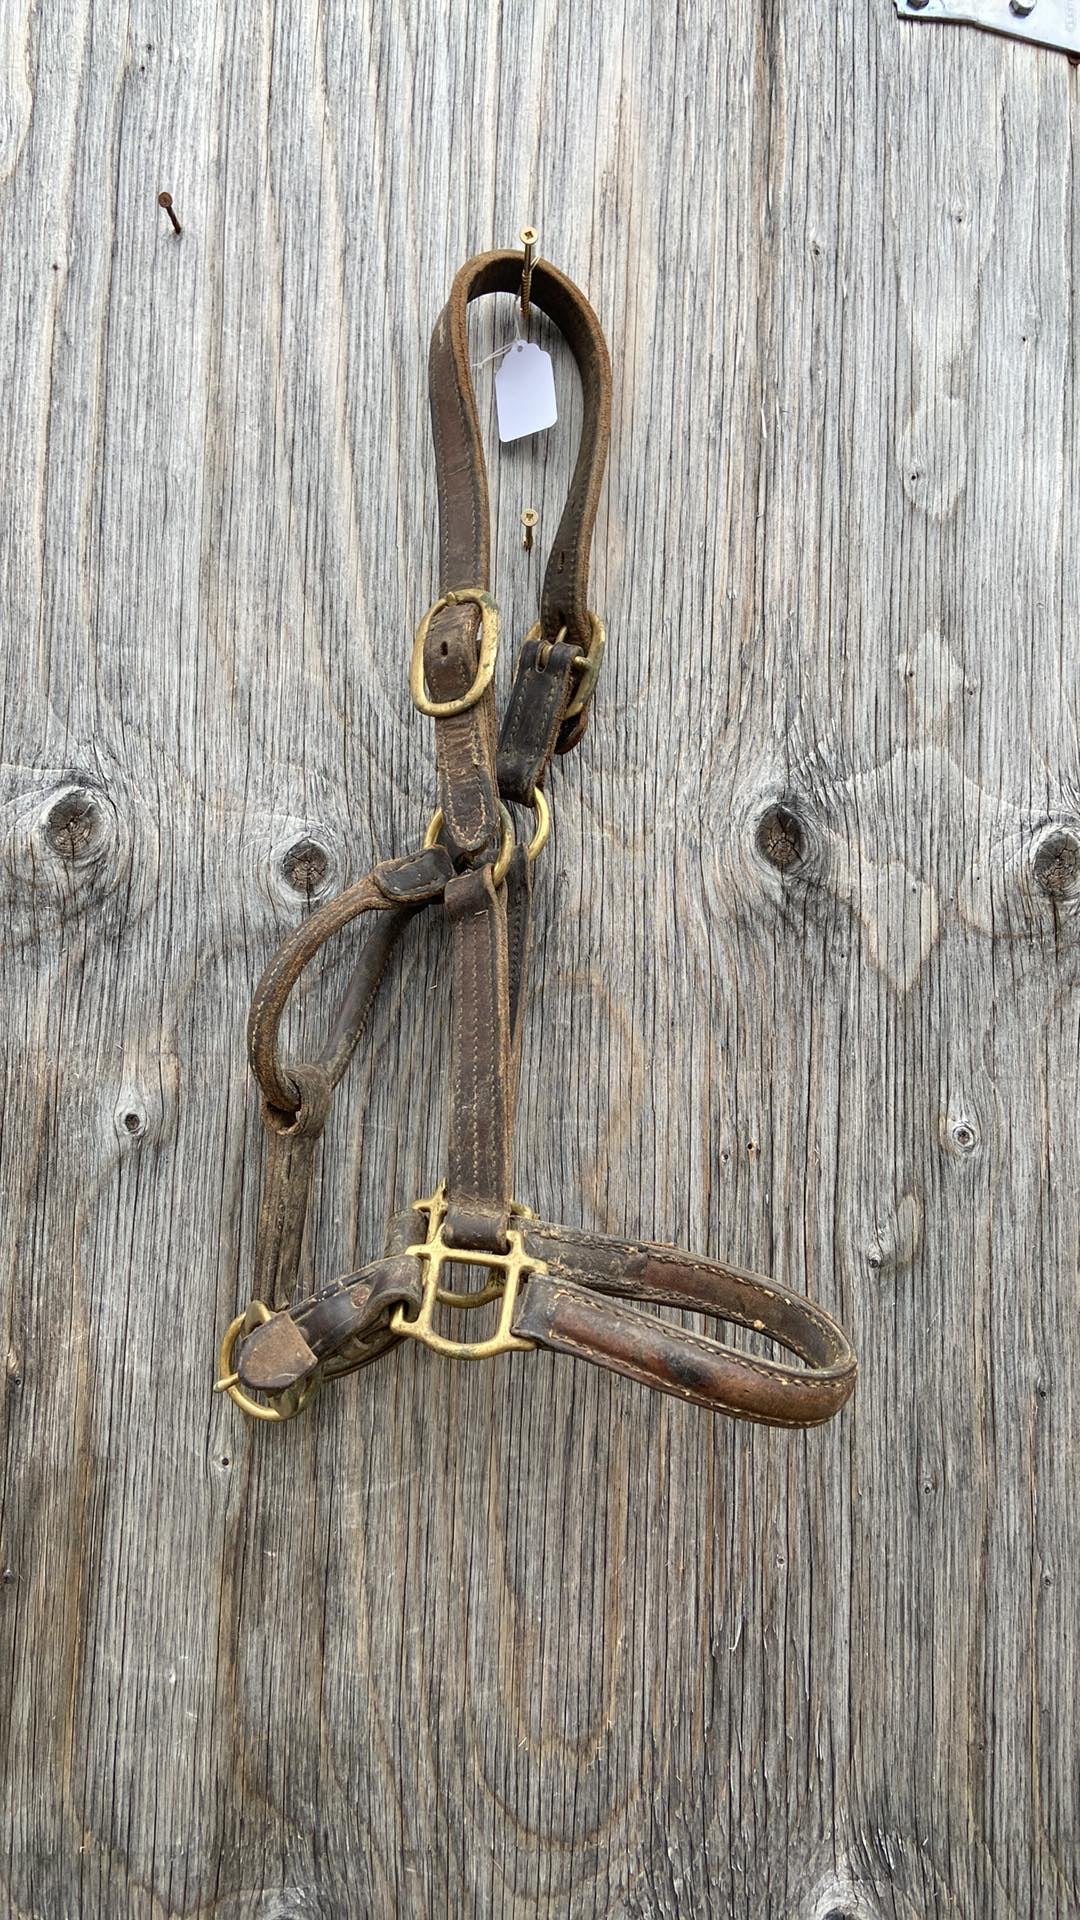 Used halters and leads